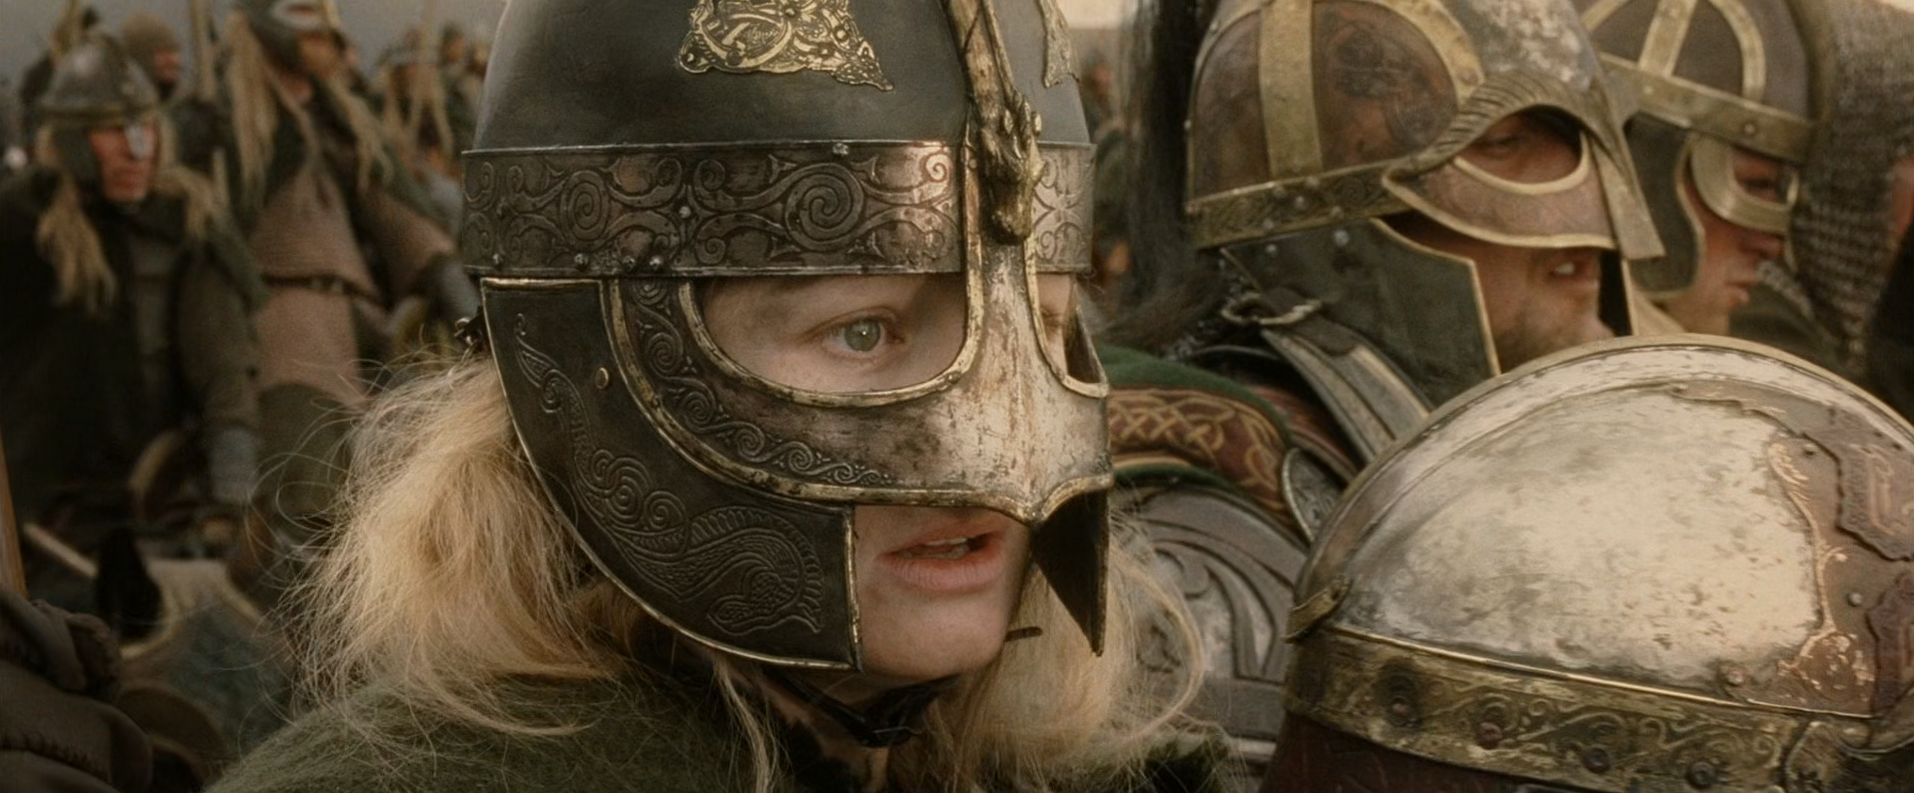 Eowyn faces her fears as she rides into battle as Dernhelm.